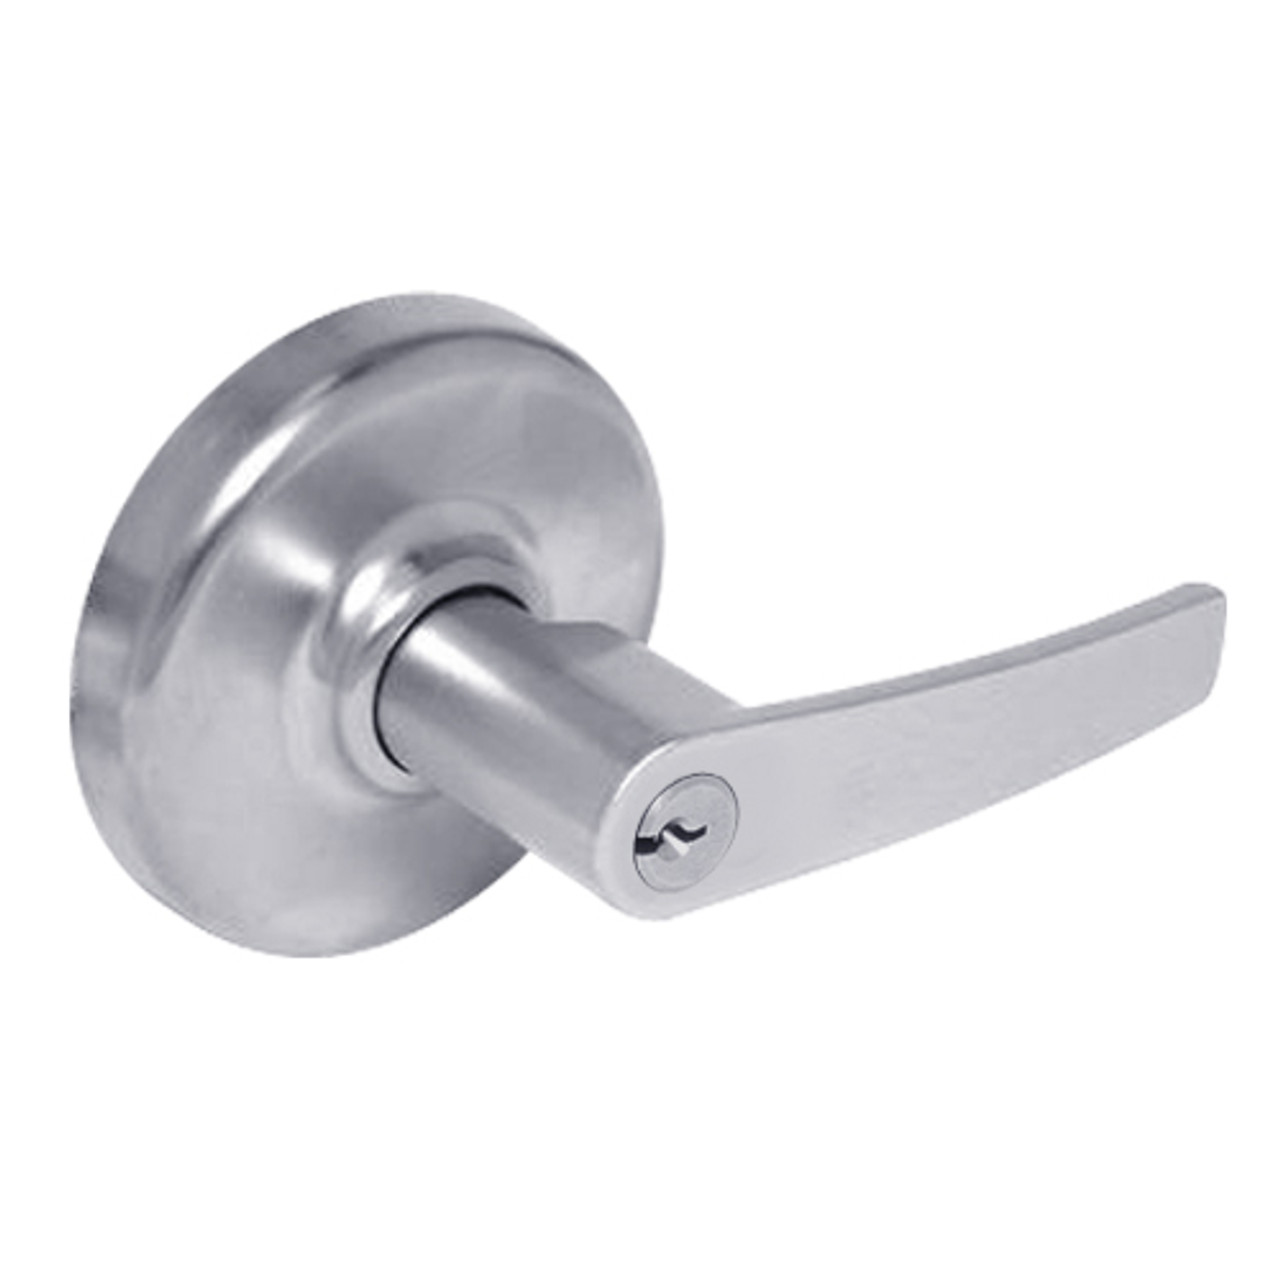 CL3375-AZD-626 Corbin CL3300 Series Extra Heavy Duty Corridor/Dormitory Cylindrical Locksets with Armstrong Lever in Satin Chrome Finish